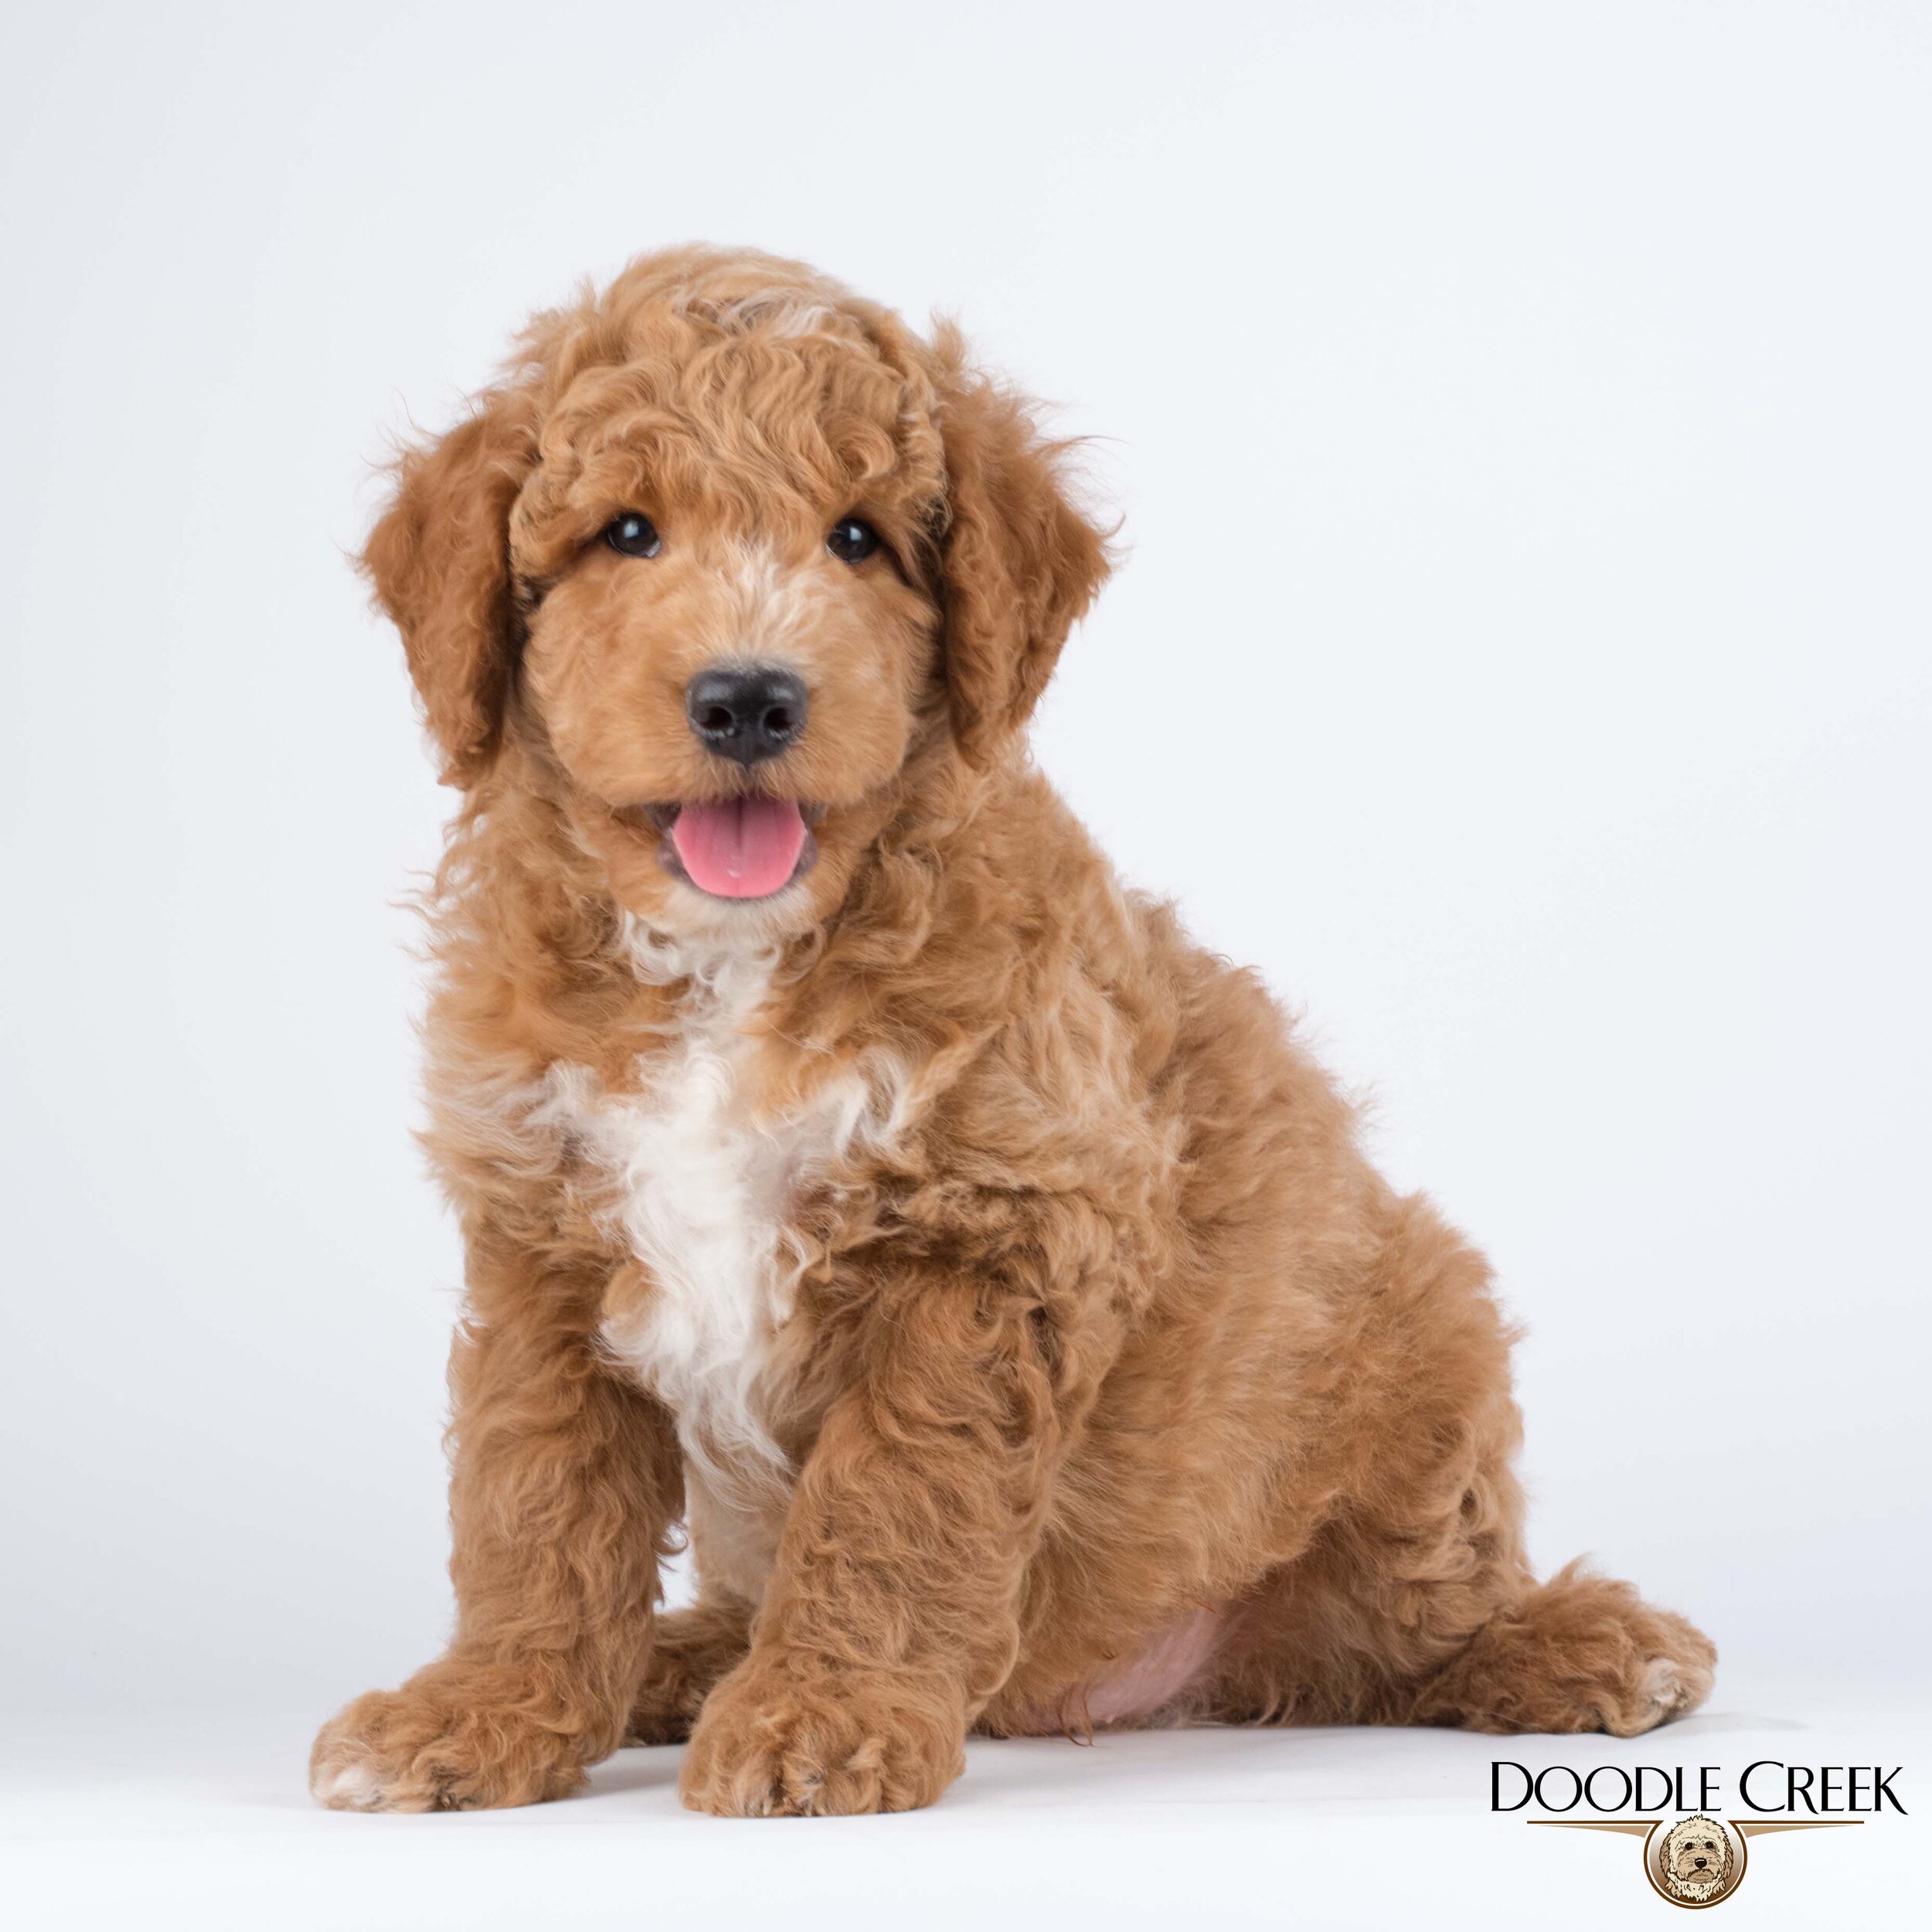 Male 3 - Sold as a trained puppy - Price: $16,000